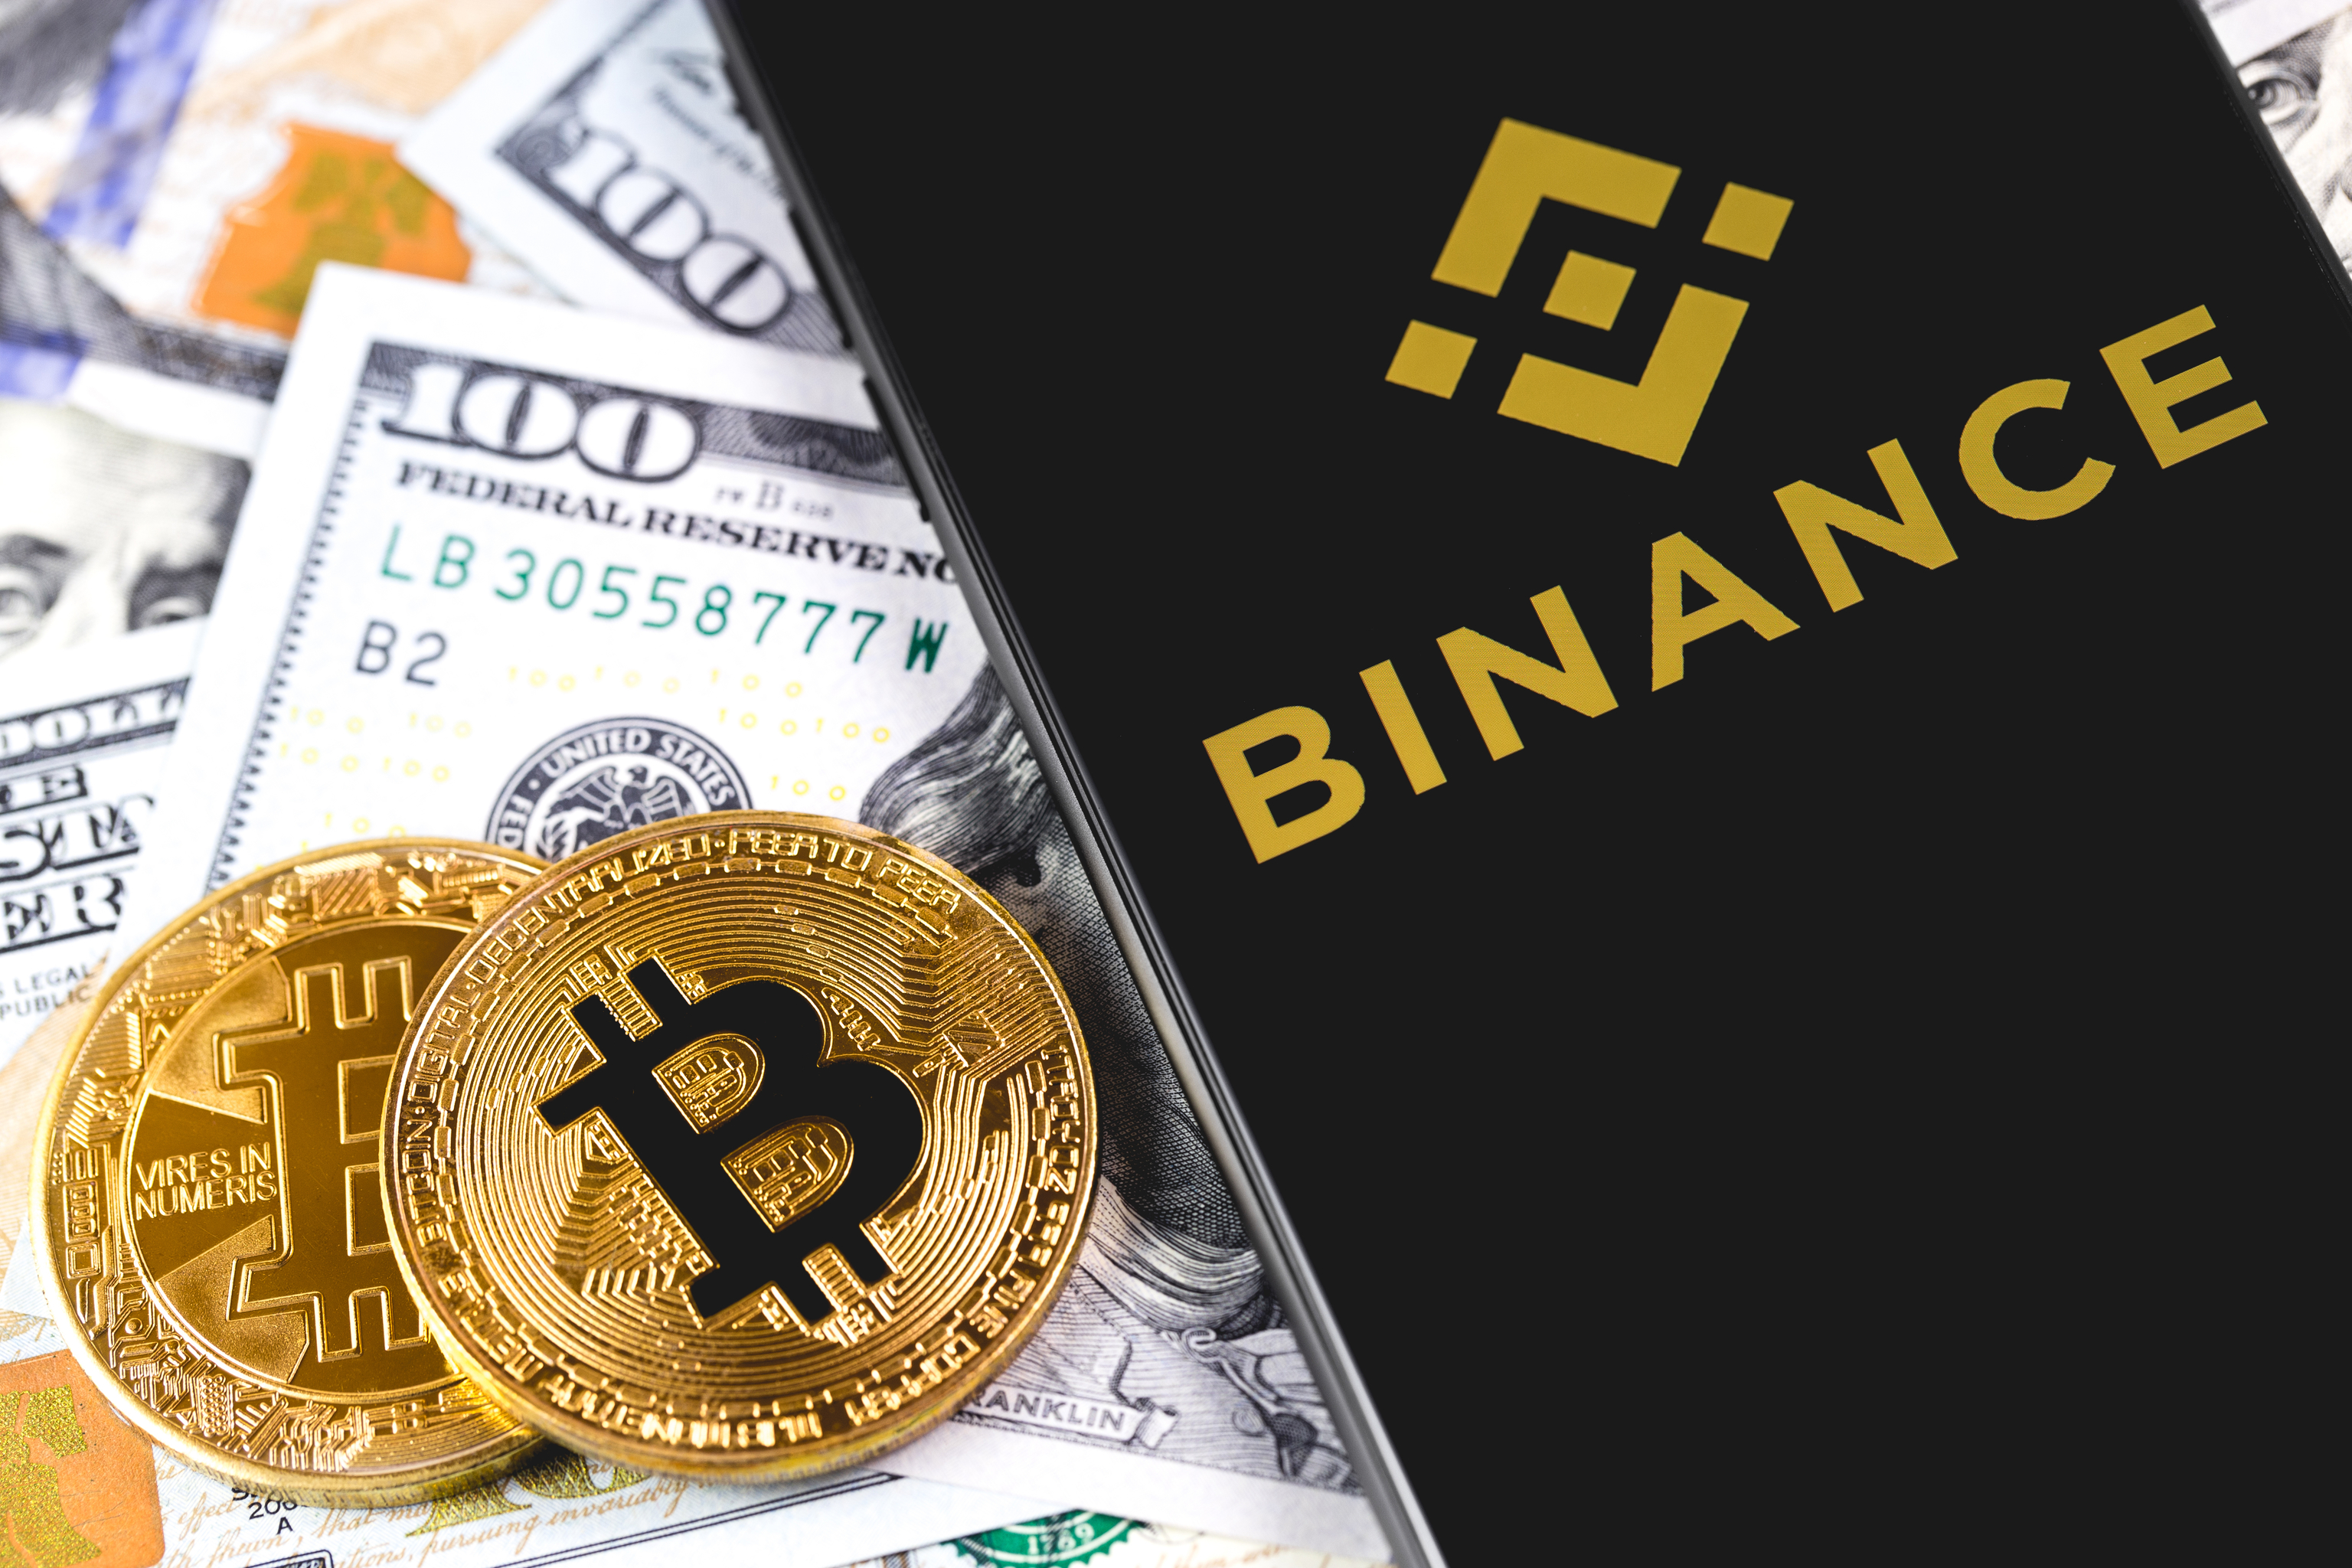 Binance and Celsius Block Cryptocurrencies by Freezing Bitcoin Withdrawals on Their Networks